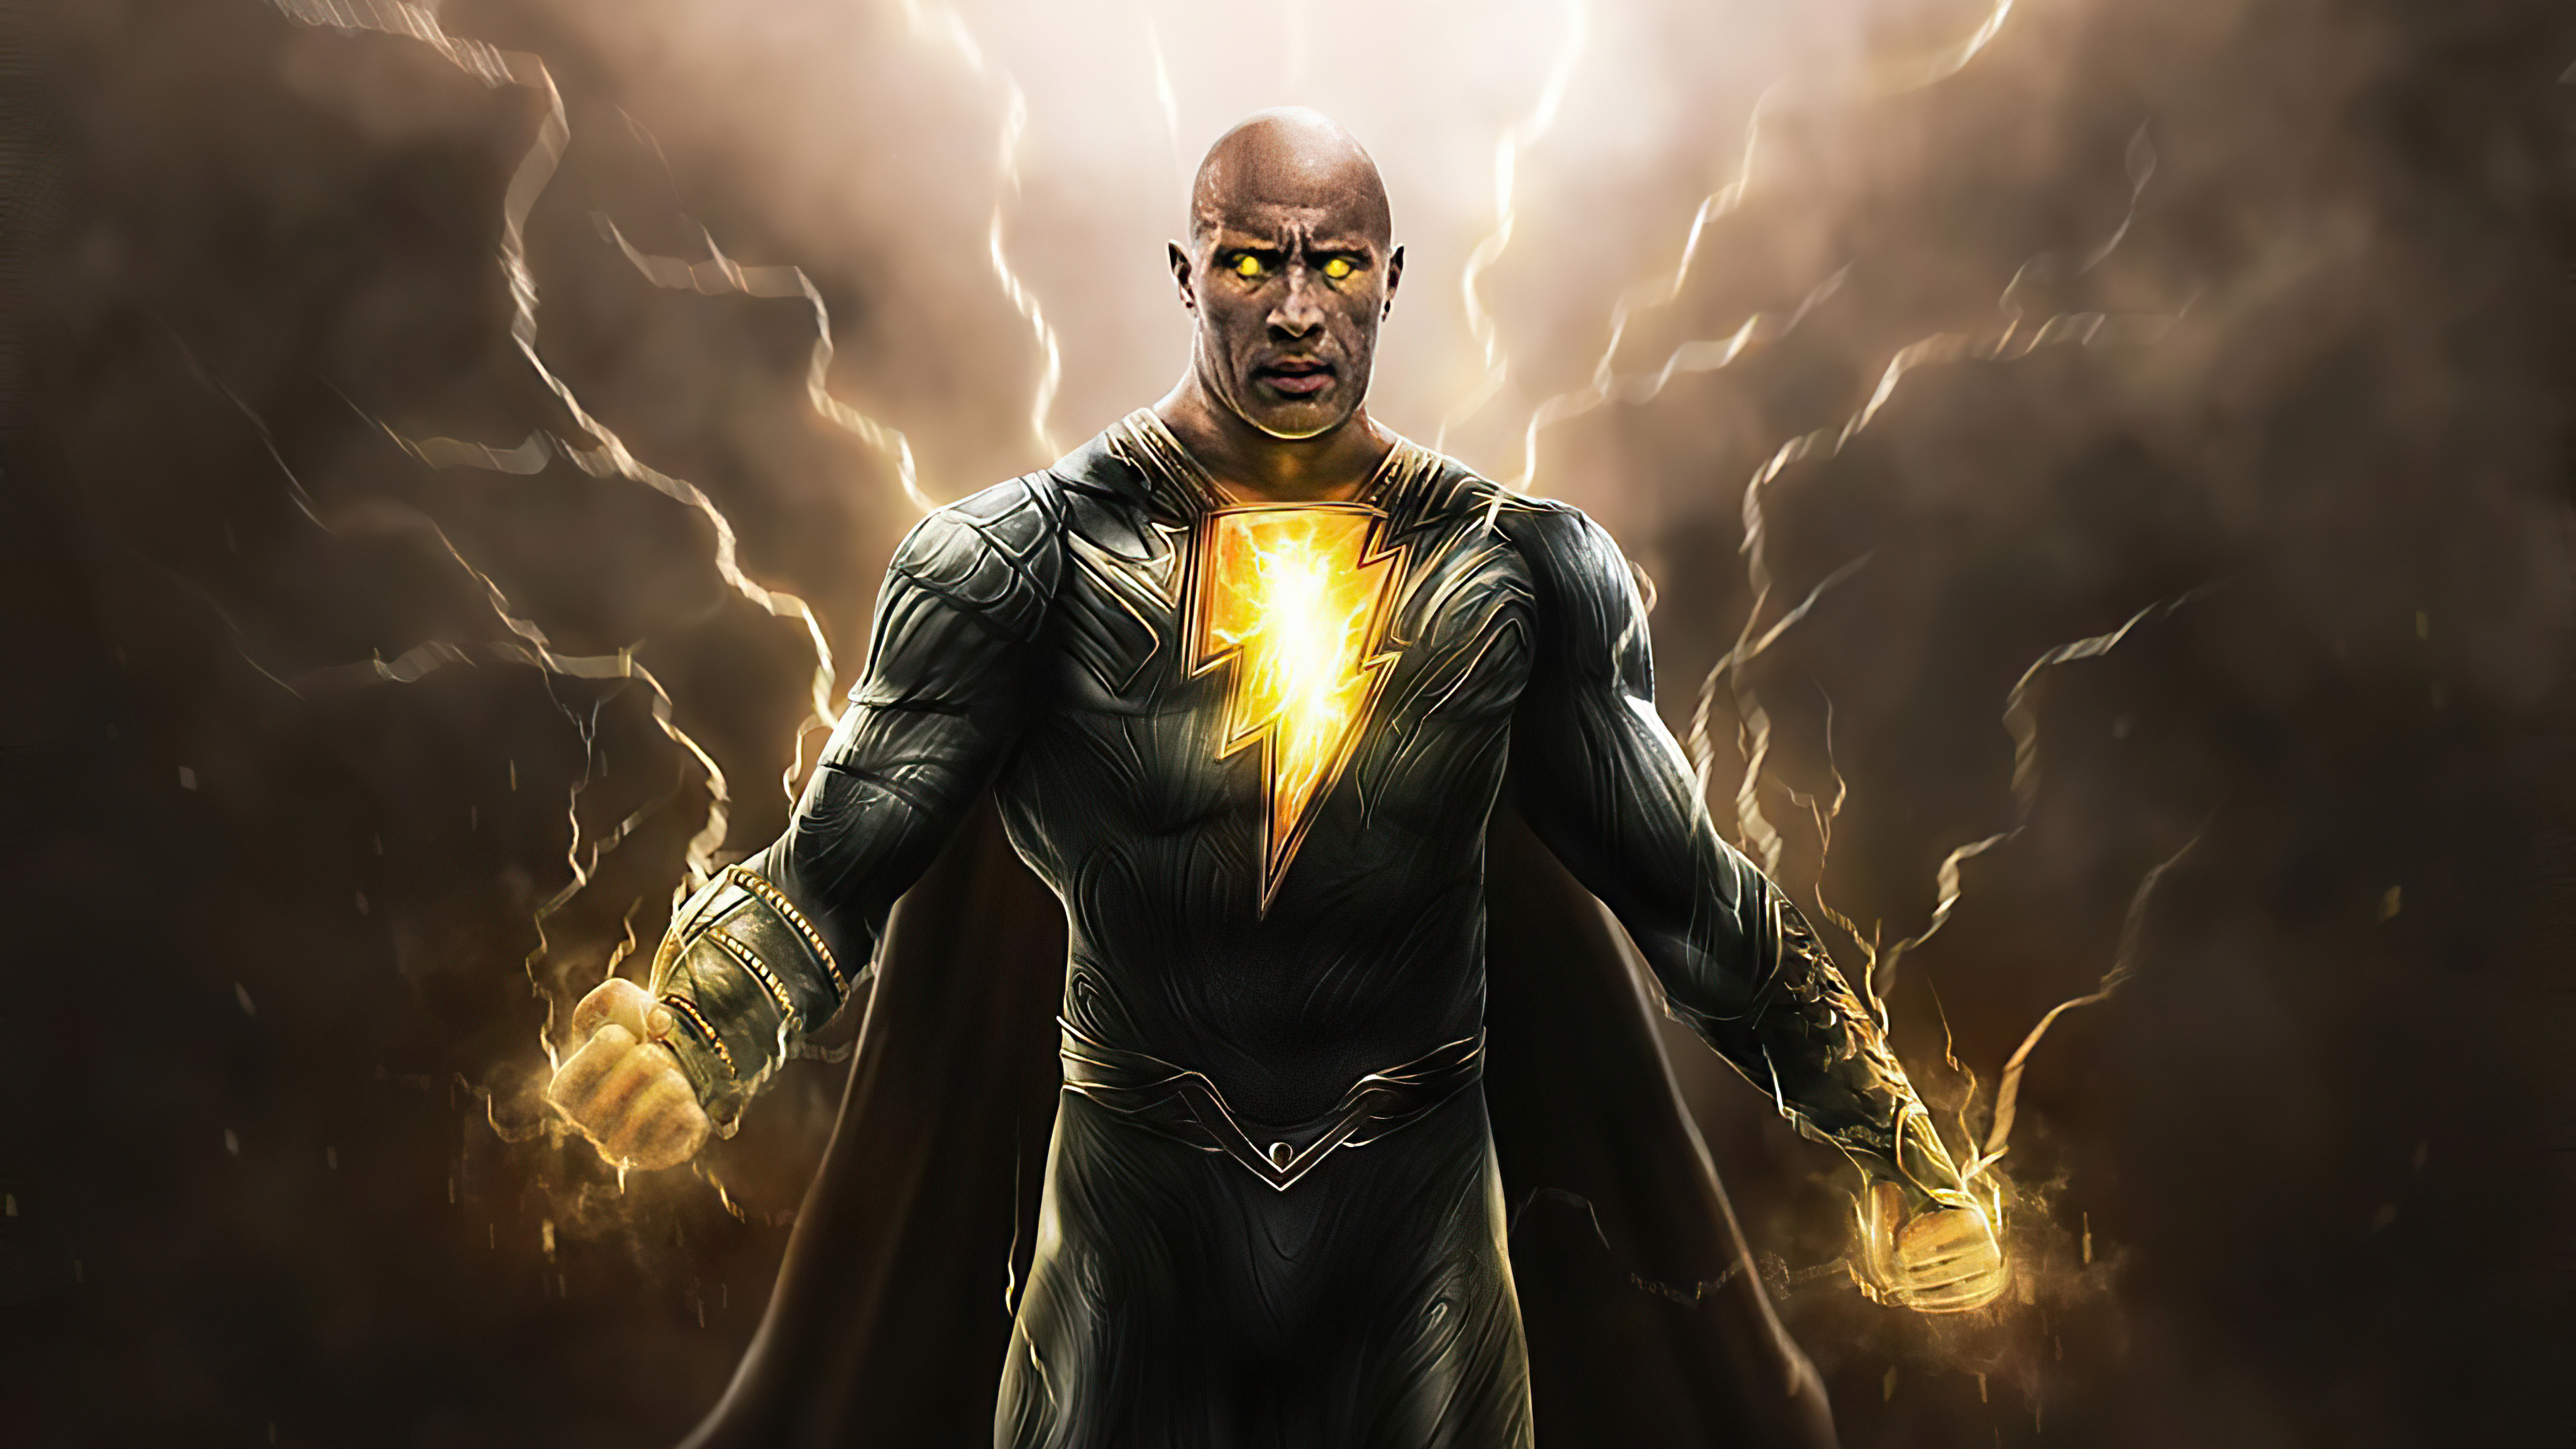 Black adam k artwork hd superheroes k wallpapers images backgrounds photos and pictures